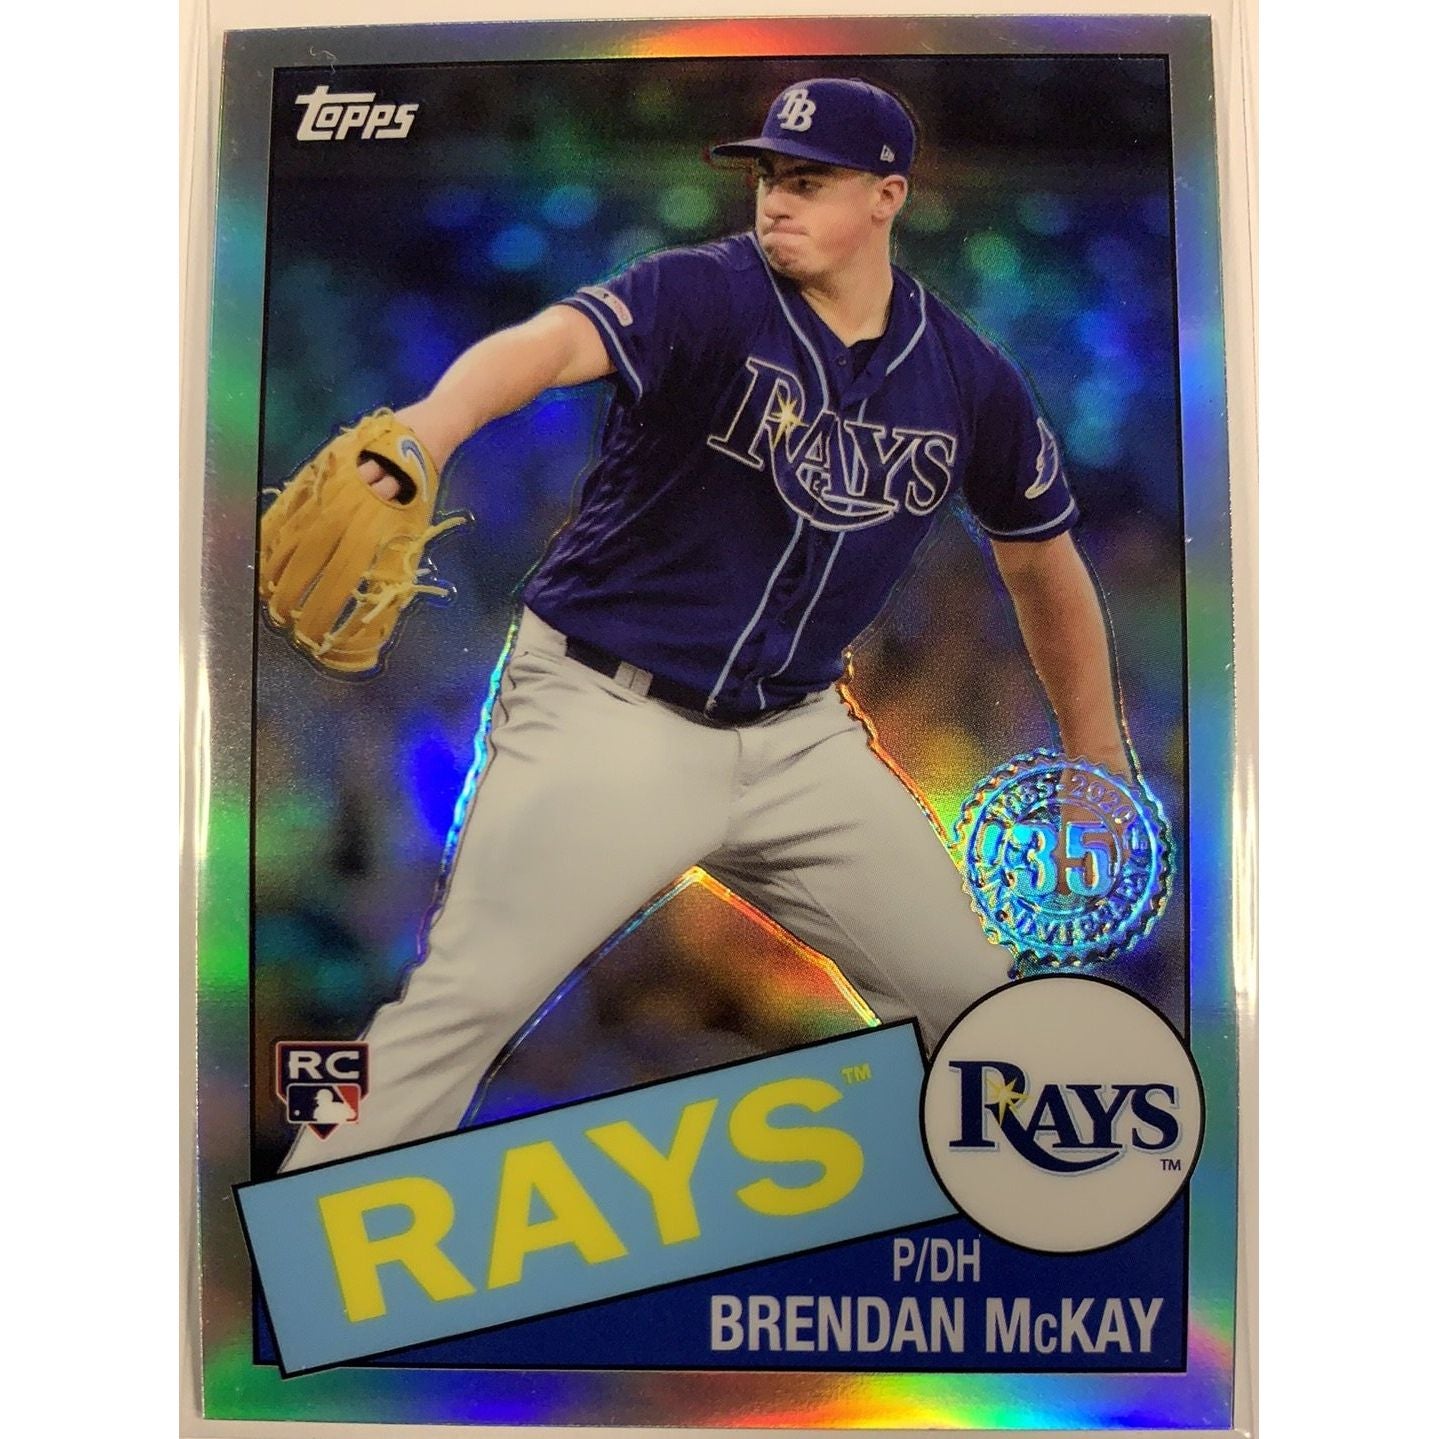  2020 Topps 35th Anniversary Brendan McKay Chrome RC Refractor  Local Legends Cards & Collectibles